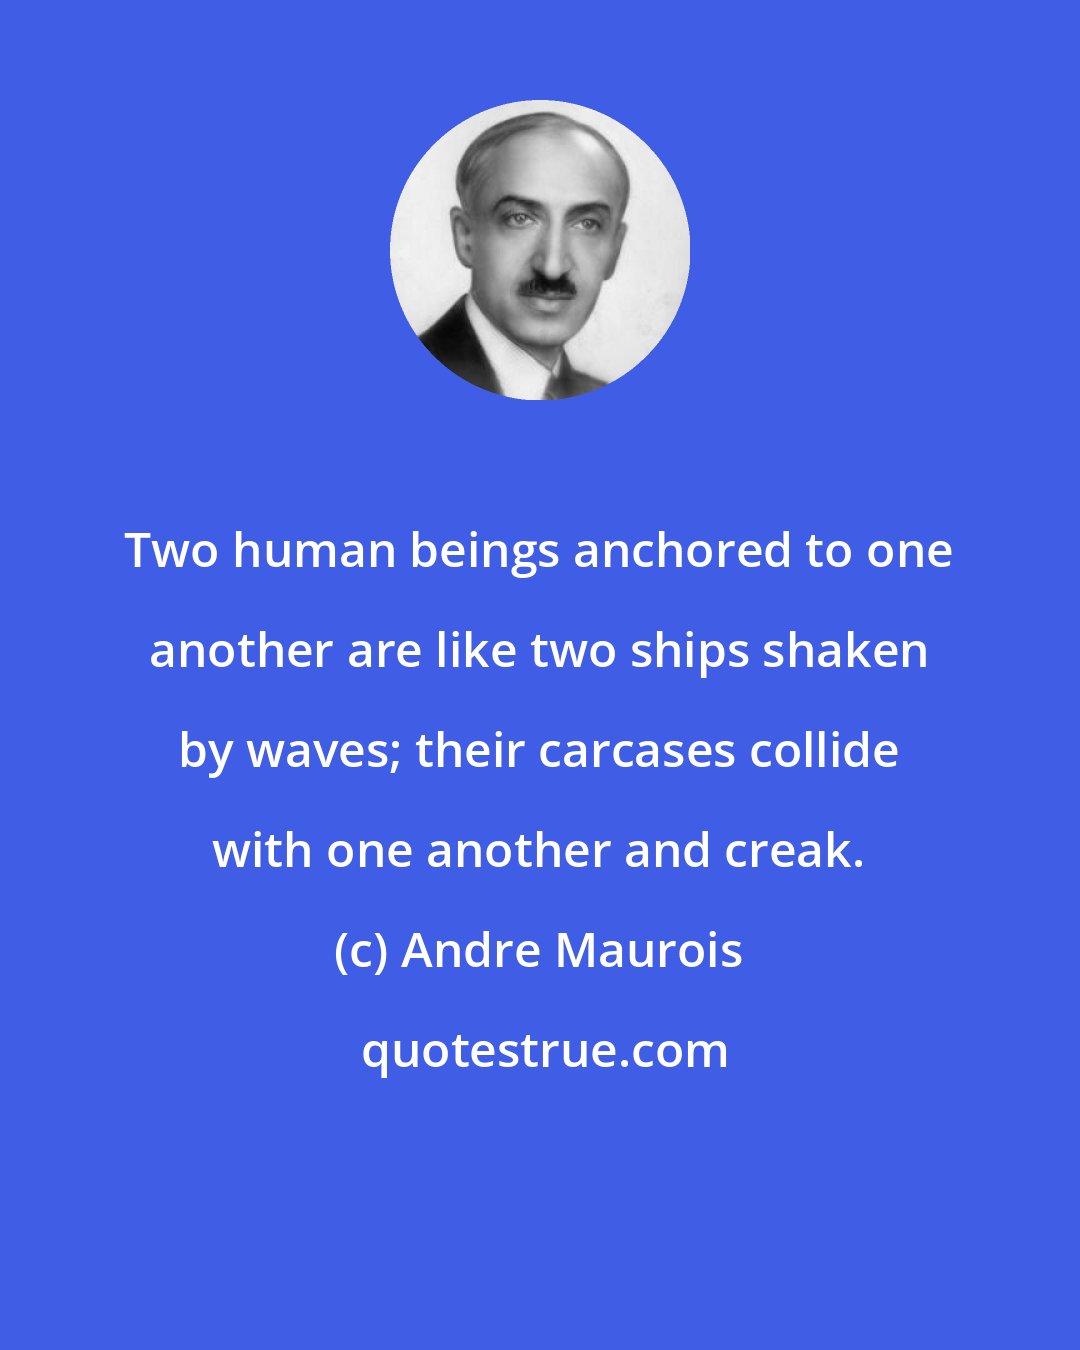 Andre Maurois: Two human beings anchored to one another are like two ships shaken by waves; their carcases collide with one another and creak.